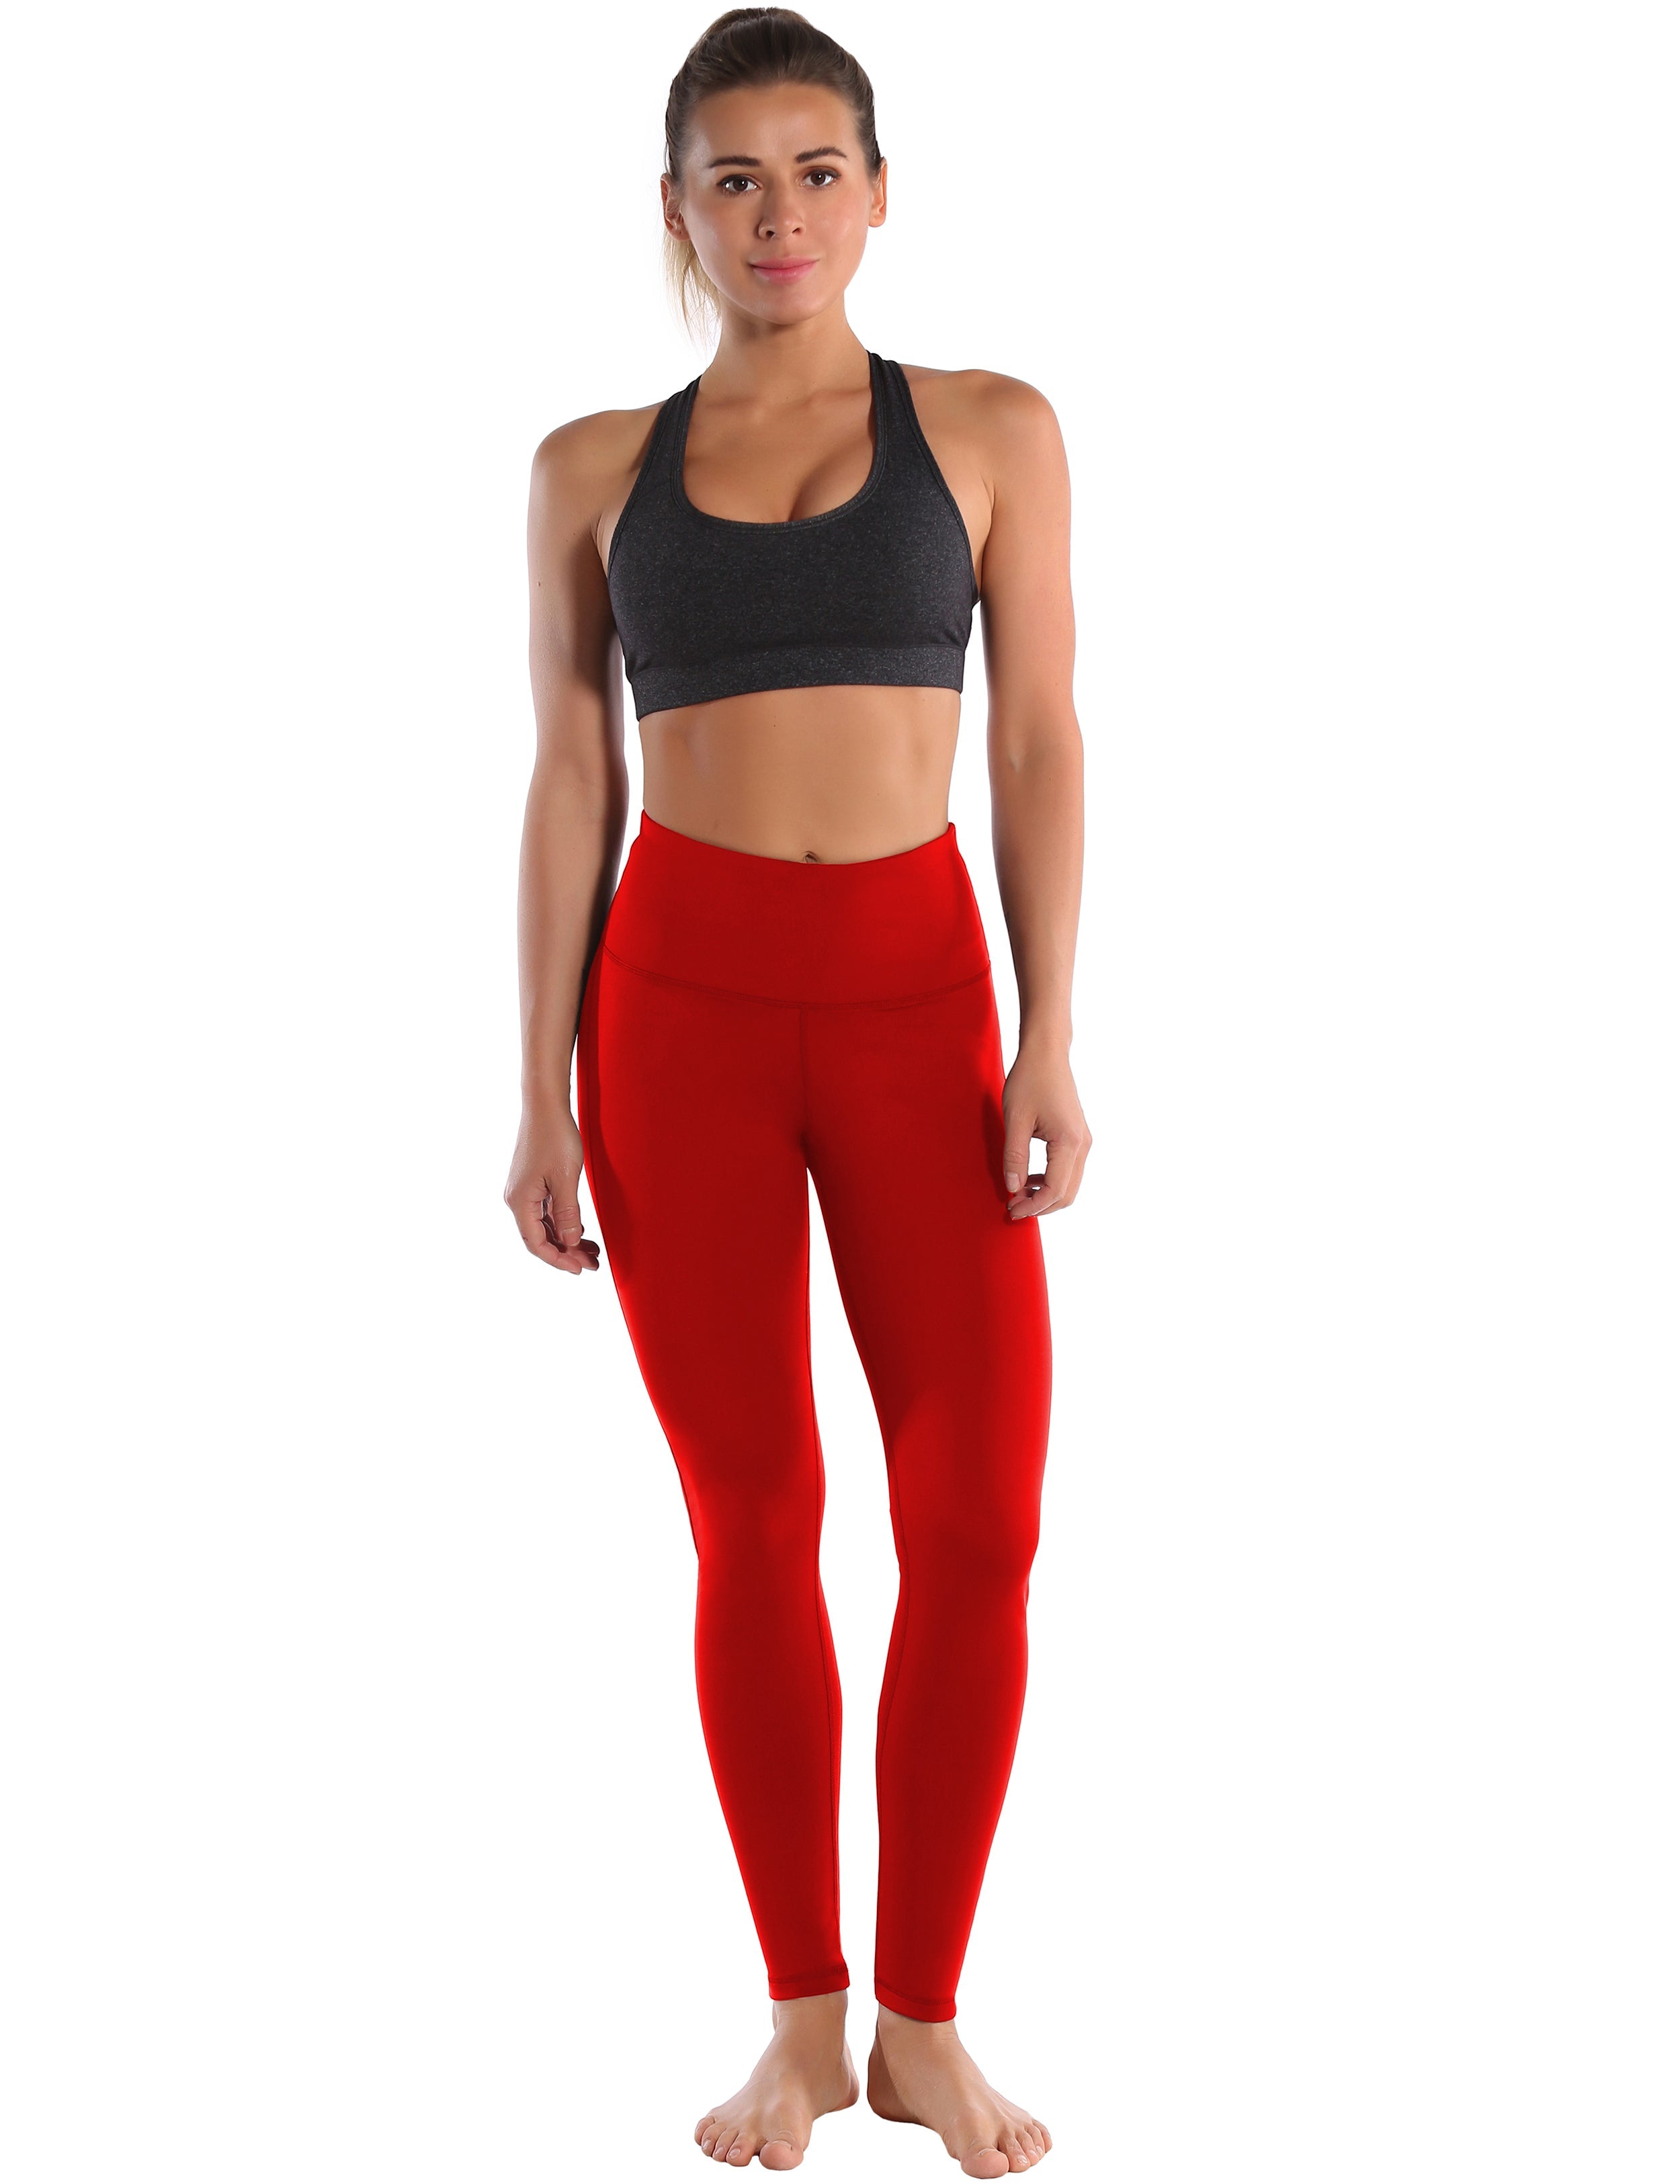 High Waist Side Line Golf Pants scarlet Side Line is Make Your Legs Look Longer and Thinner 75%Nylon/25%Spandex Fabric doesn't attract lint easily 4-way stretch No see-through Moisture-wicking Tummy control Inner pocket Two lengths